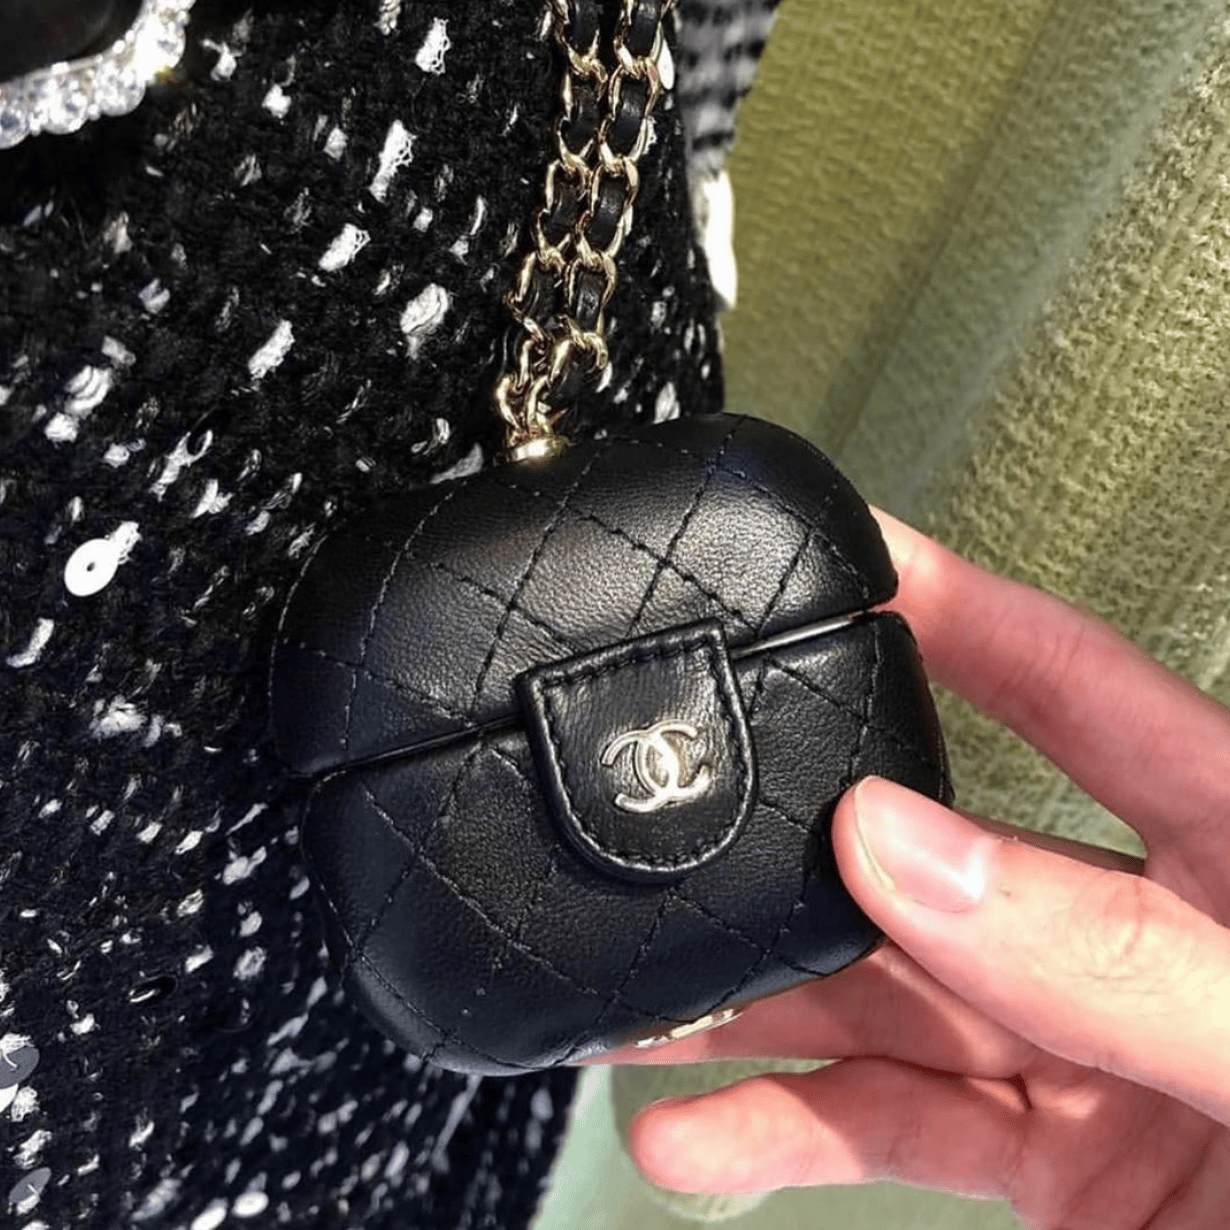 The best AirPods cases, from Chanel to